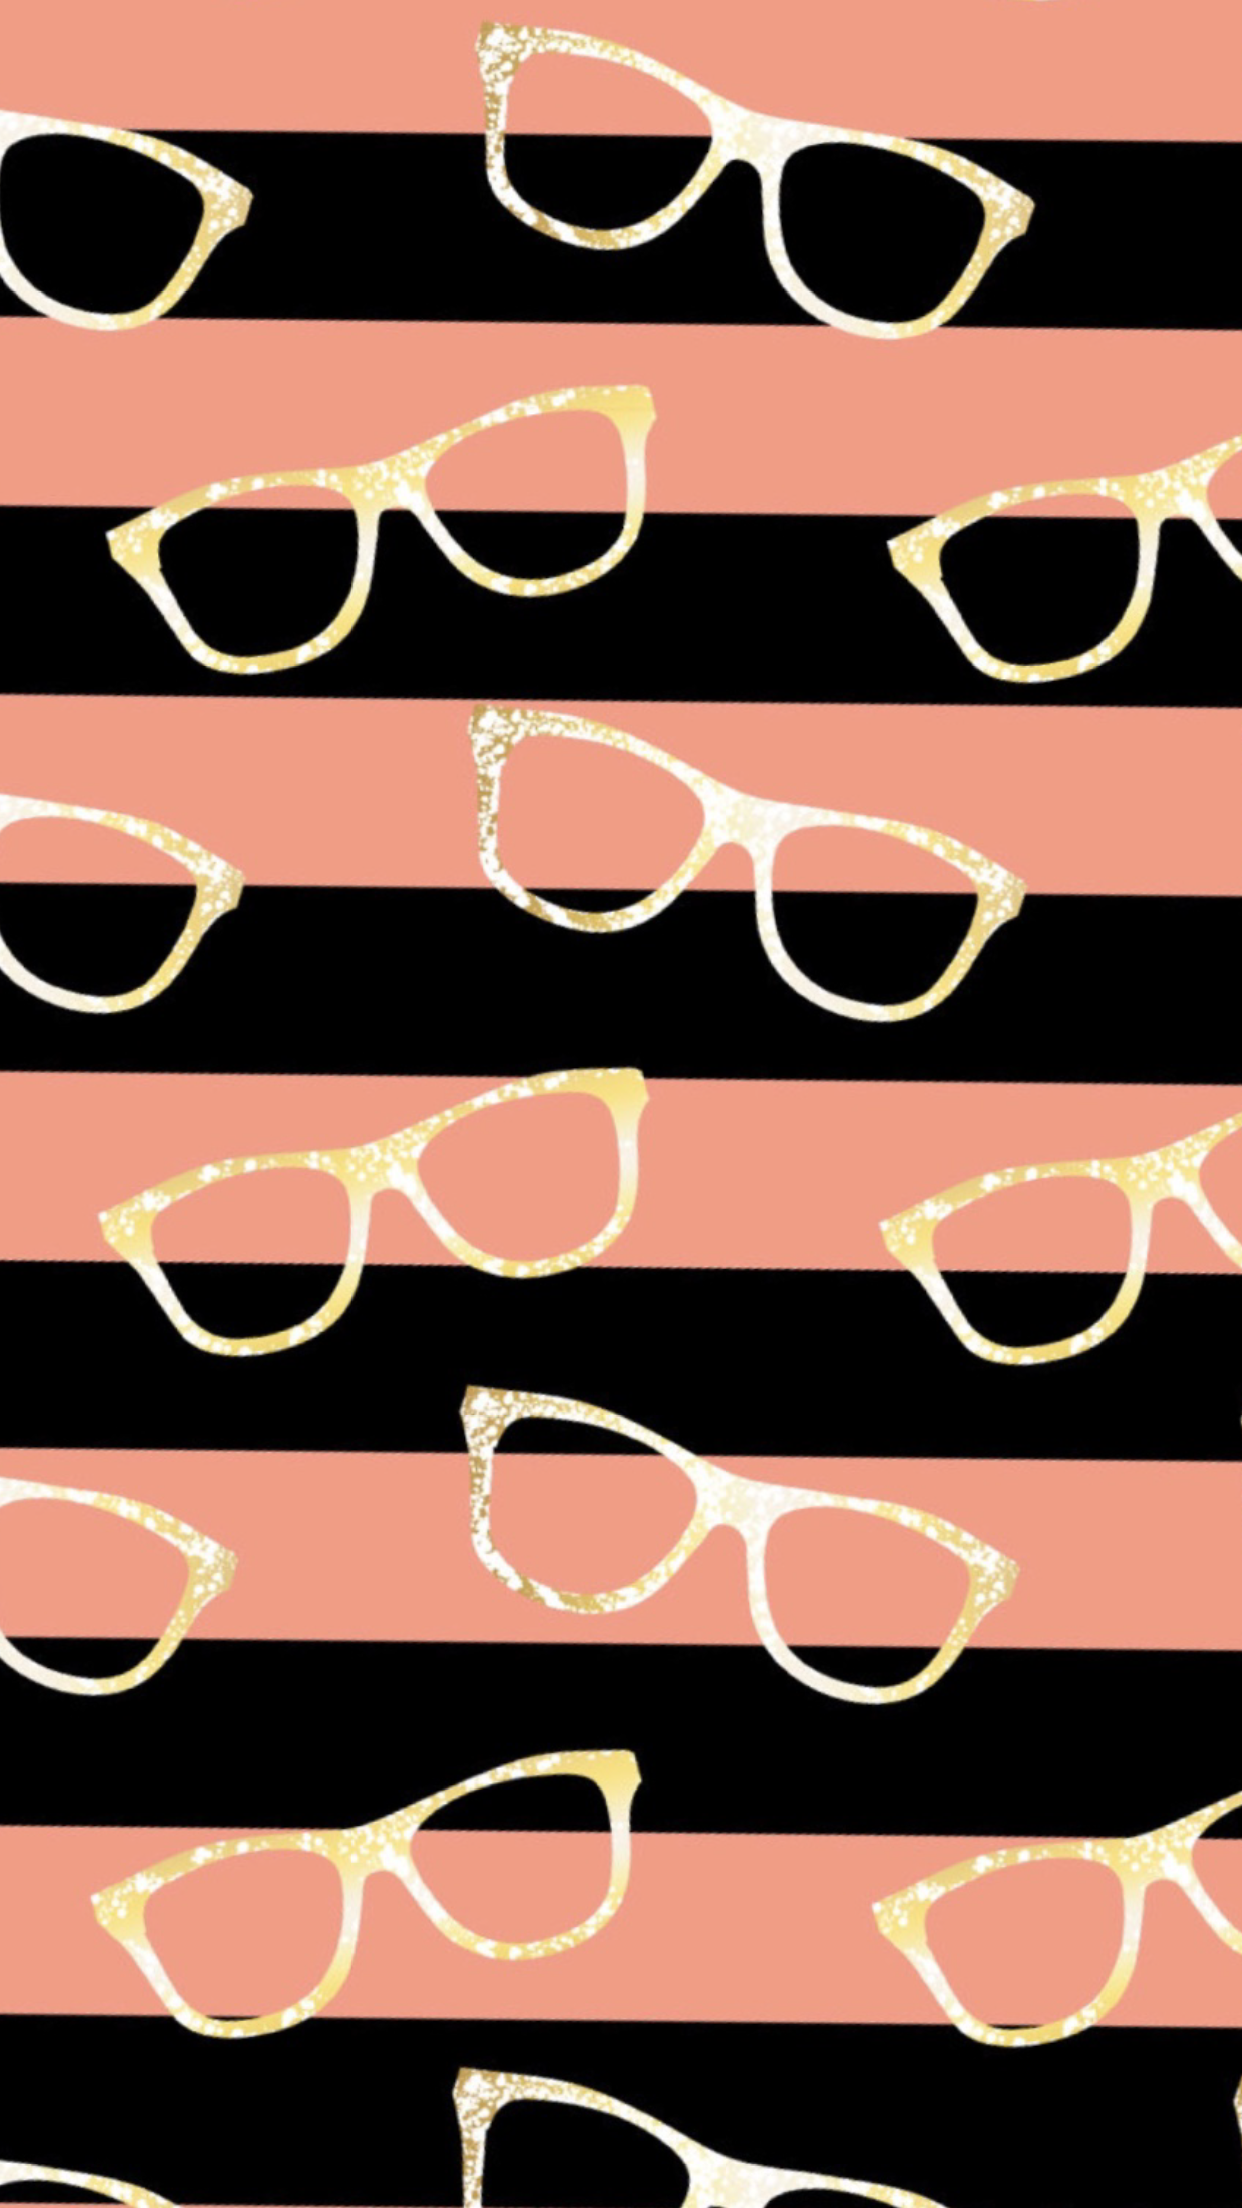 26 Glasses ideas | glasses wallpaper, glasses, wallpaper backgrounds